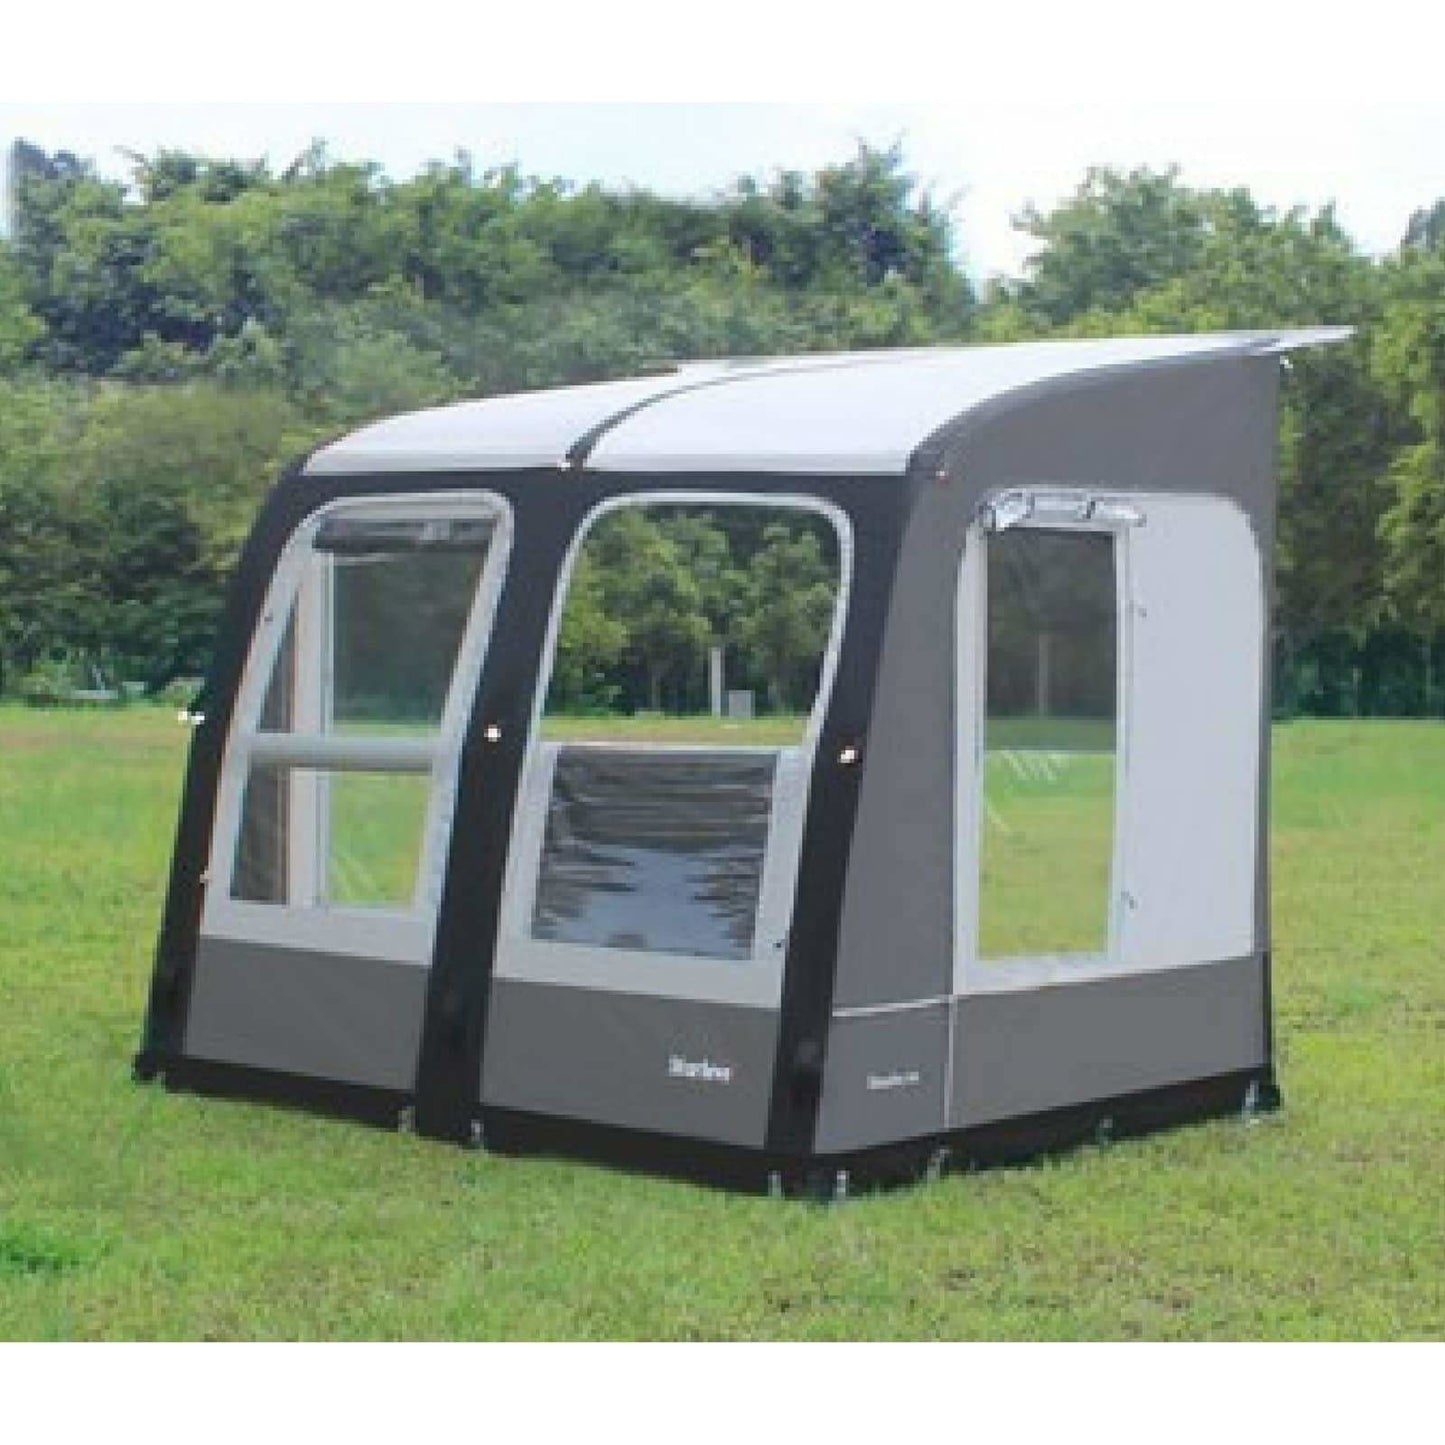 Camptech Starline 260 Inflatable Air Porch Caravan Awning + FREE Straps (2019) made by CampTech. A Air Awning sold by Quality Caravan Awnings